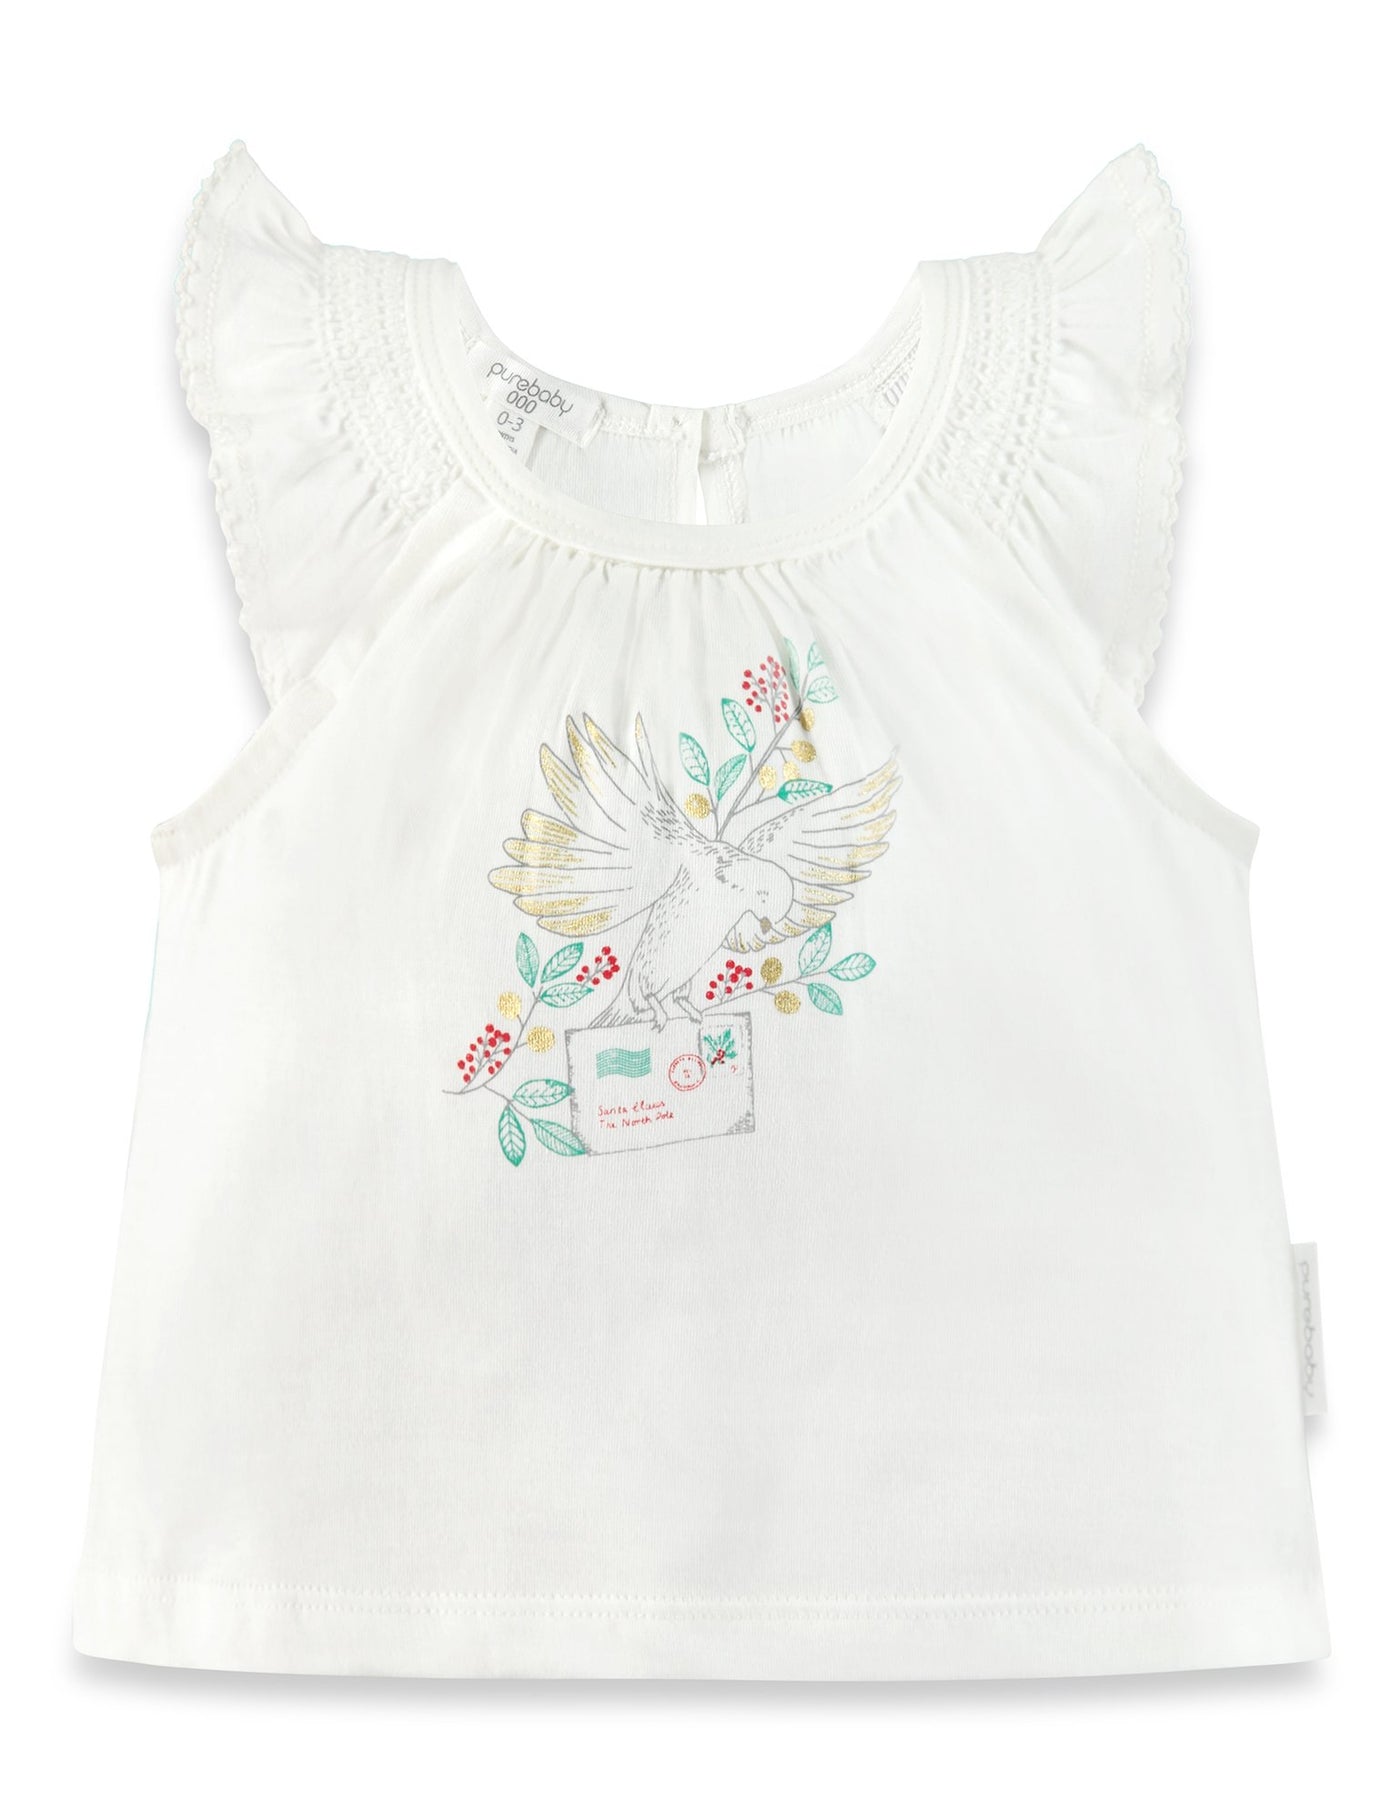 Purebaby Baby Girl Christmas Tee - Vanilla-Outlet Shop For Kids